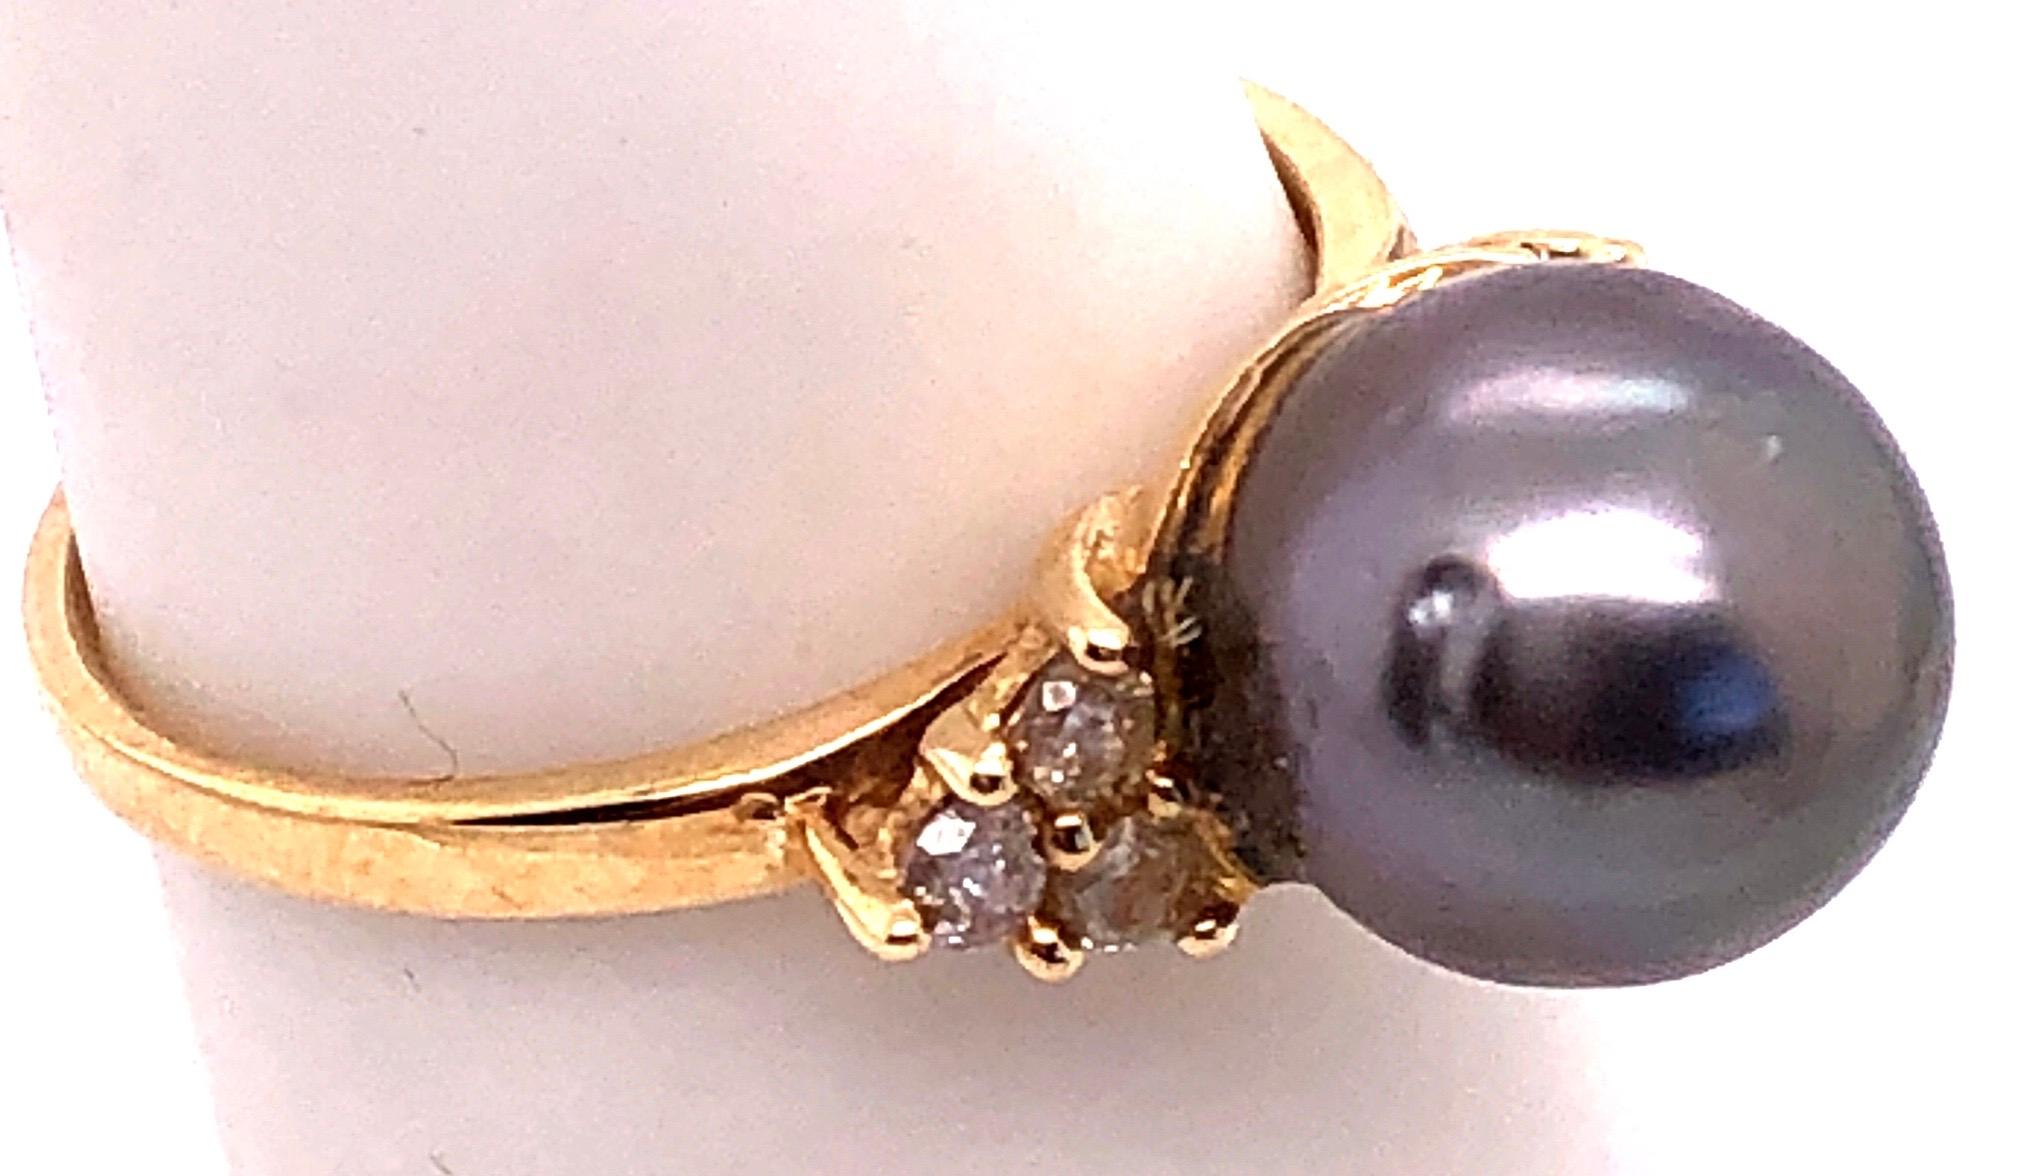 14 Karat Yellow Gold Ring Black Pearl Solitaire With Diamond Accents Size 7.
9 mm diameter pearl
0.18 total diamond weight
3.4 grams total weight.